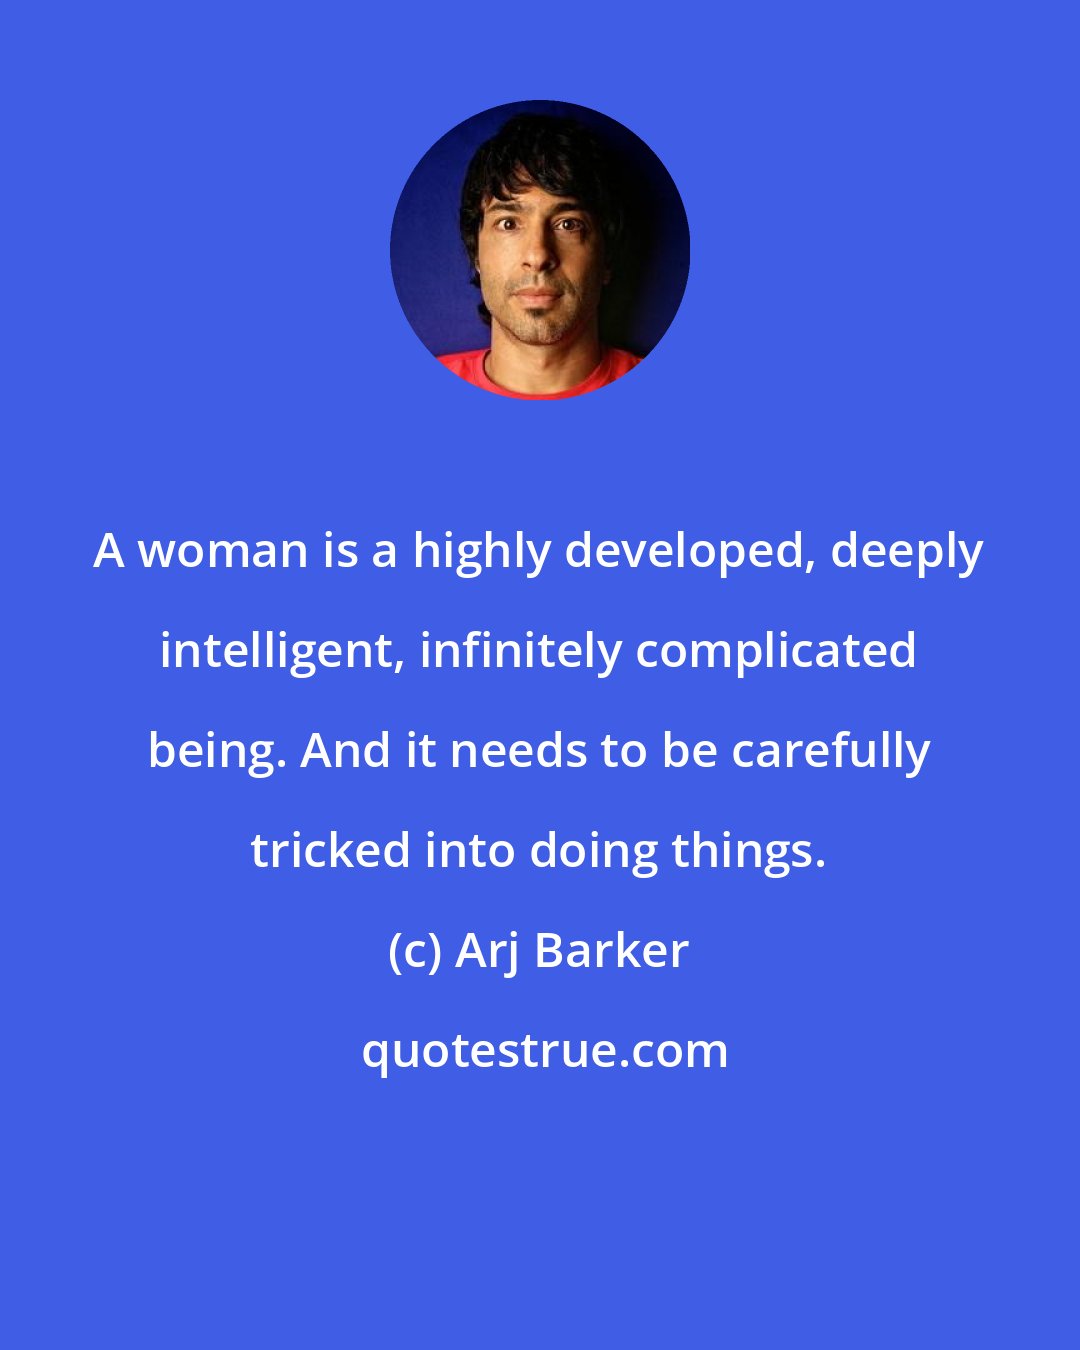 Arj Barker: A woman is a highly developed, deeply intelligent, infinitely complicated being. And it needs to be carefully tricked into doing things.